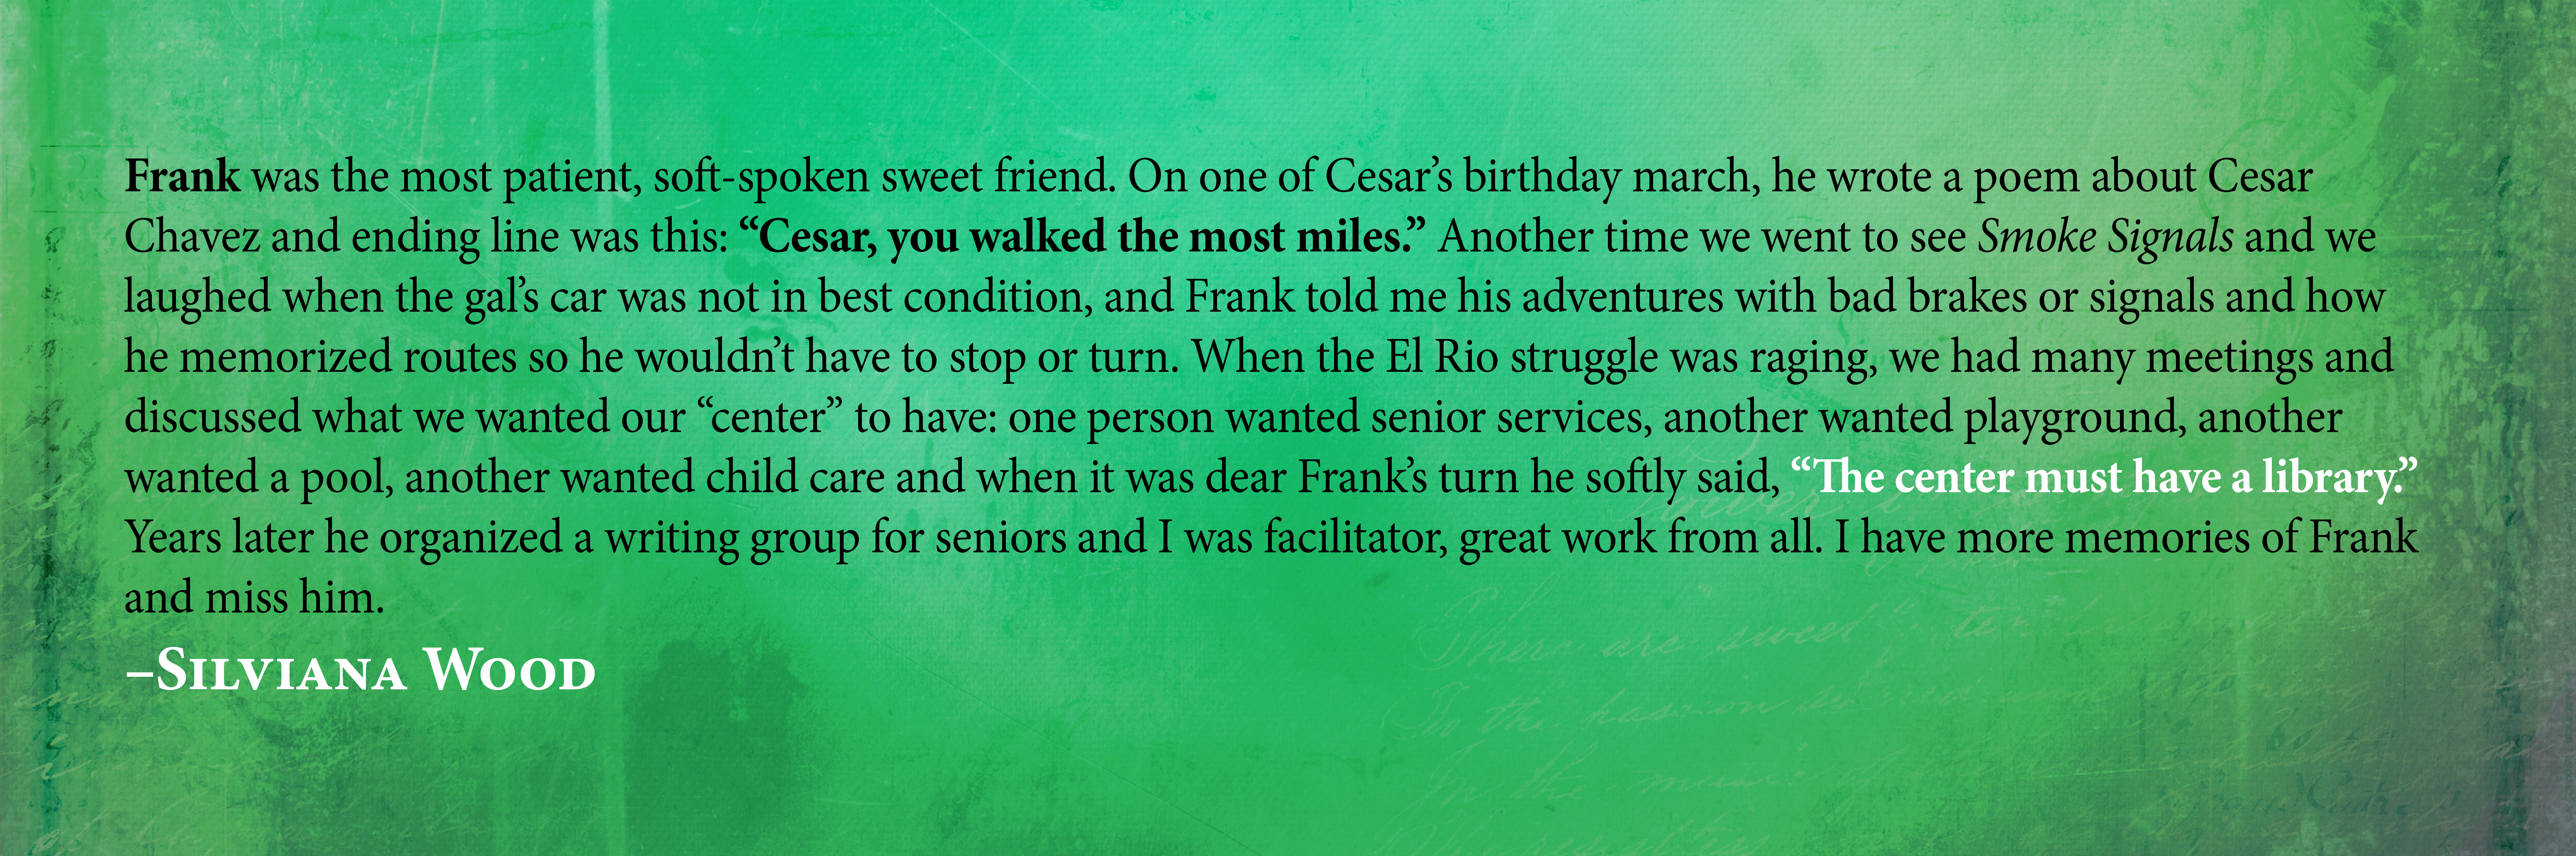 Frank was the most patient, soft-spoken sweet friend.On one of Cesar's birthday march, he wrote a poem about Cesar Chavez and ending line was this: "Cesar, you walked the most miles." Another time we went to see Smoke Signals and we laughed when the gal's car was not in best condition, and Frank told me his adventures with bad brakes or signals and how he memorized routes so he wouldn't have to stop or turn. When the El Rio struggle was raging, we had many meetings and discussed what we wanted our "center" to have: one person wanted senior services, another wanted playground, another wanted a pool, another wanted child care and when it was dear Frank's turn he softly said, "The center must have a library." Years later he organized a writing group for seniors and I was facilitator, great work from all. I have more memories of Frank and miss him. Silviana Wood